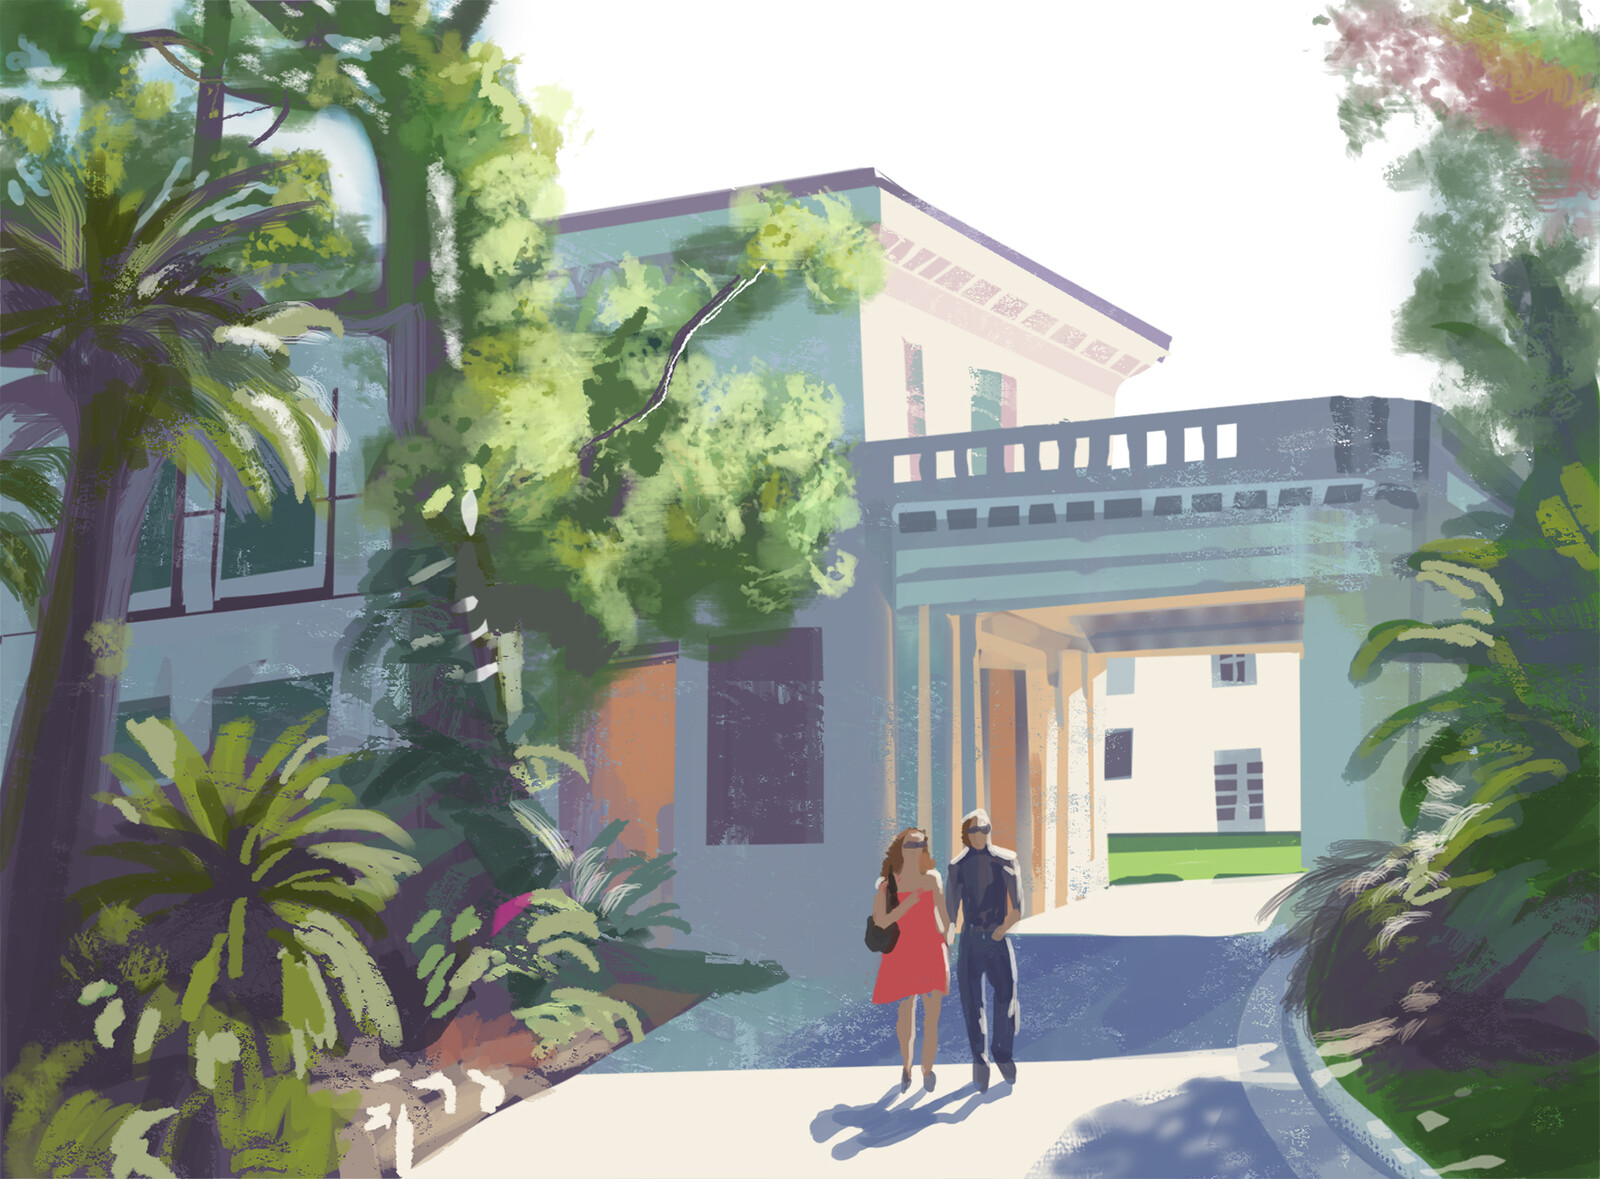 Based on a photo from Huntington Library in California. This took me 90 minutes.